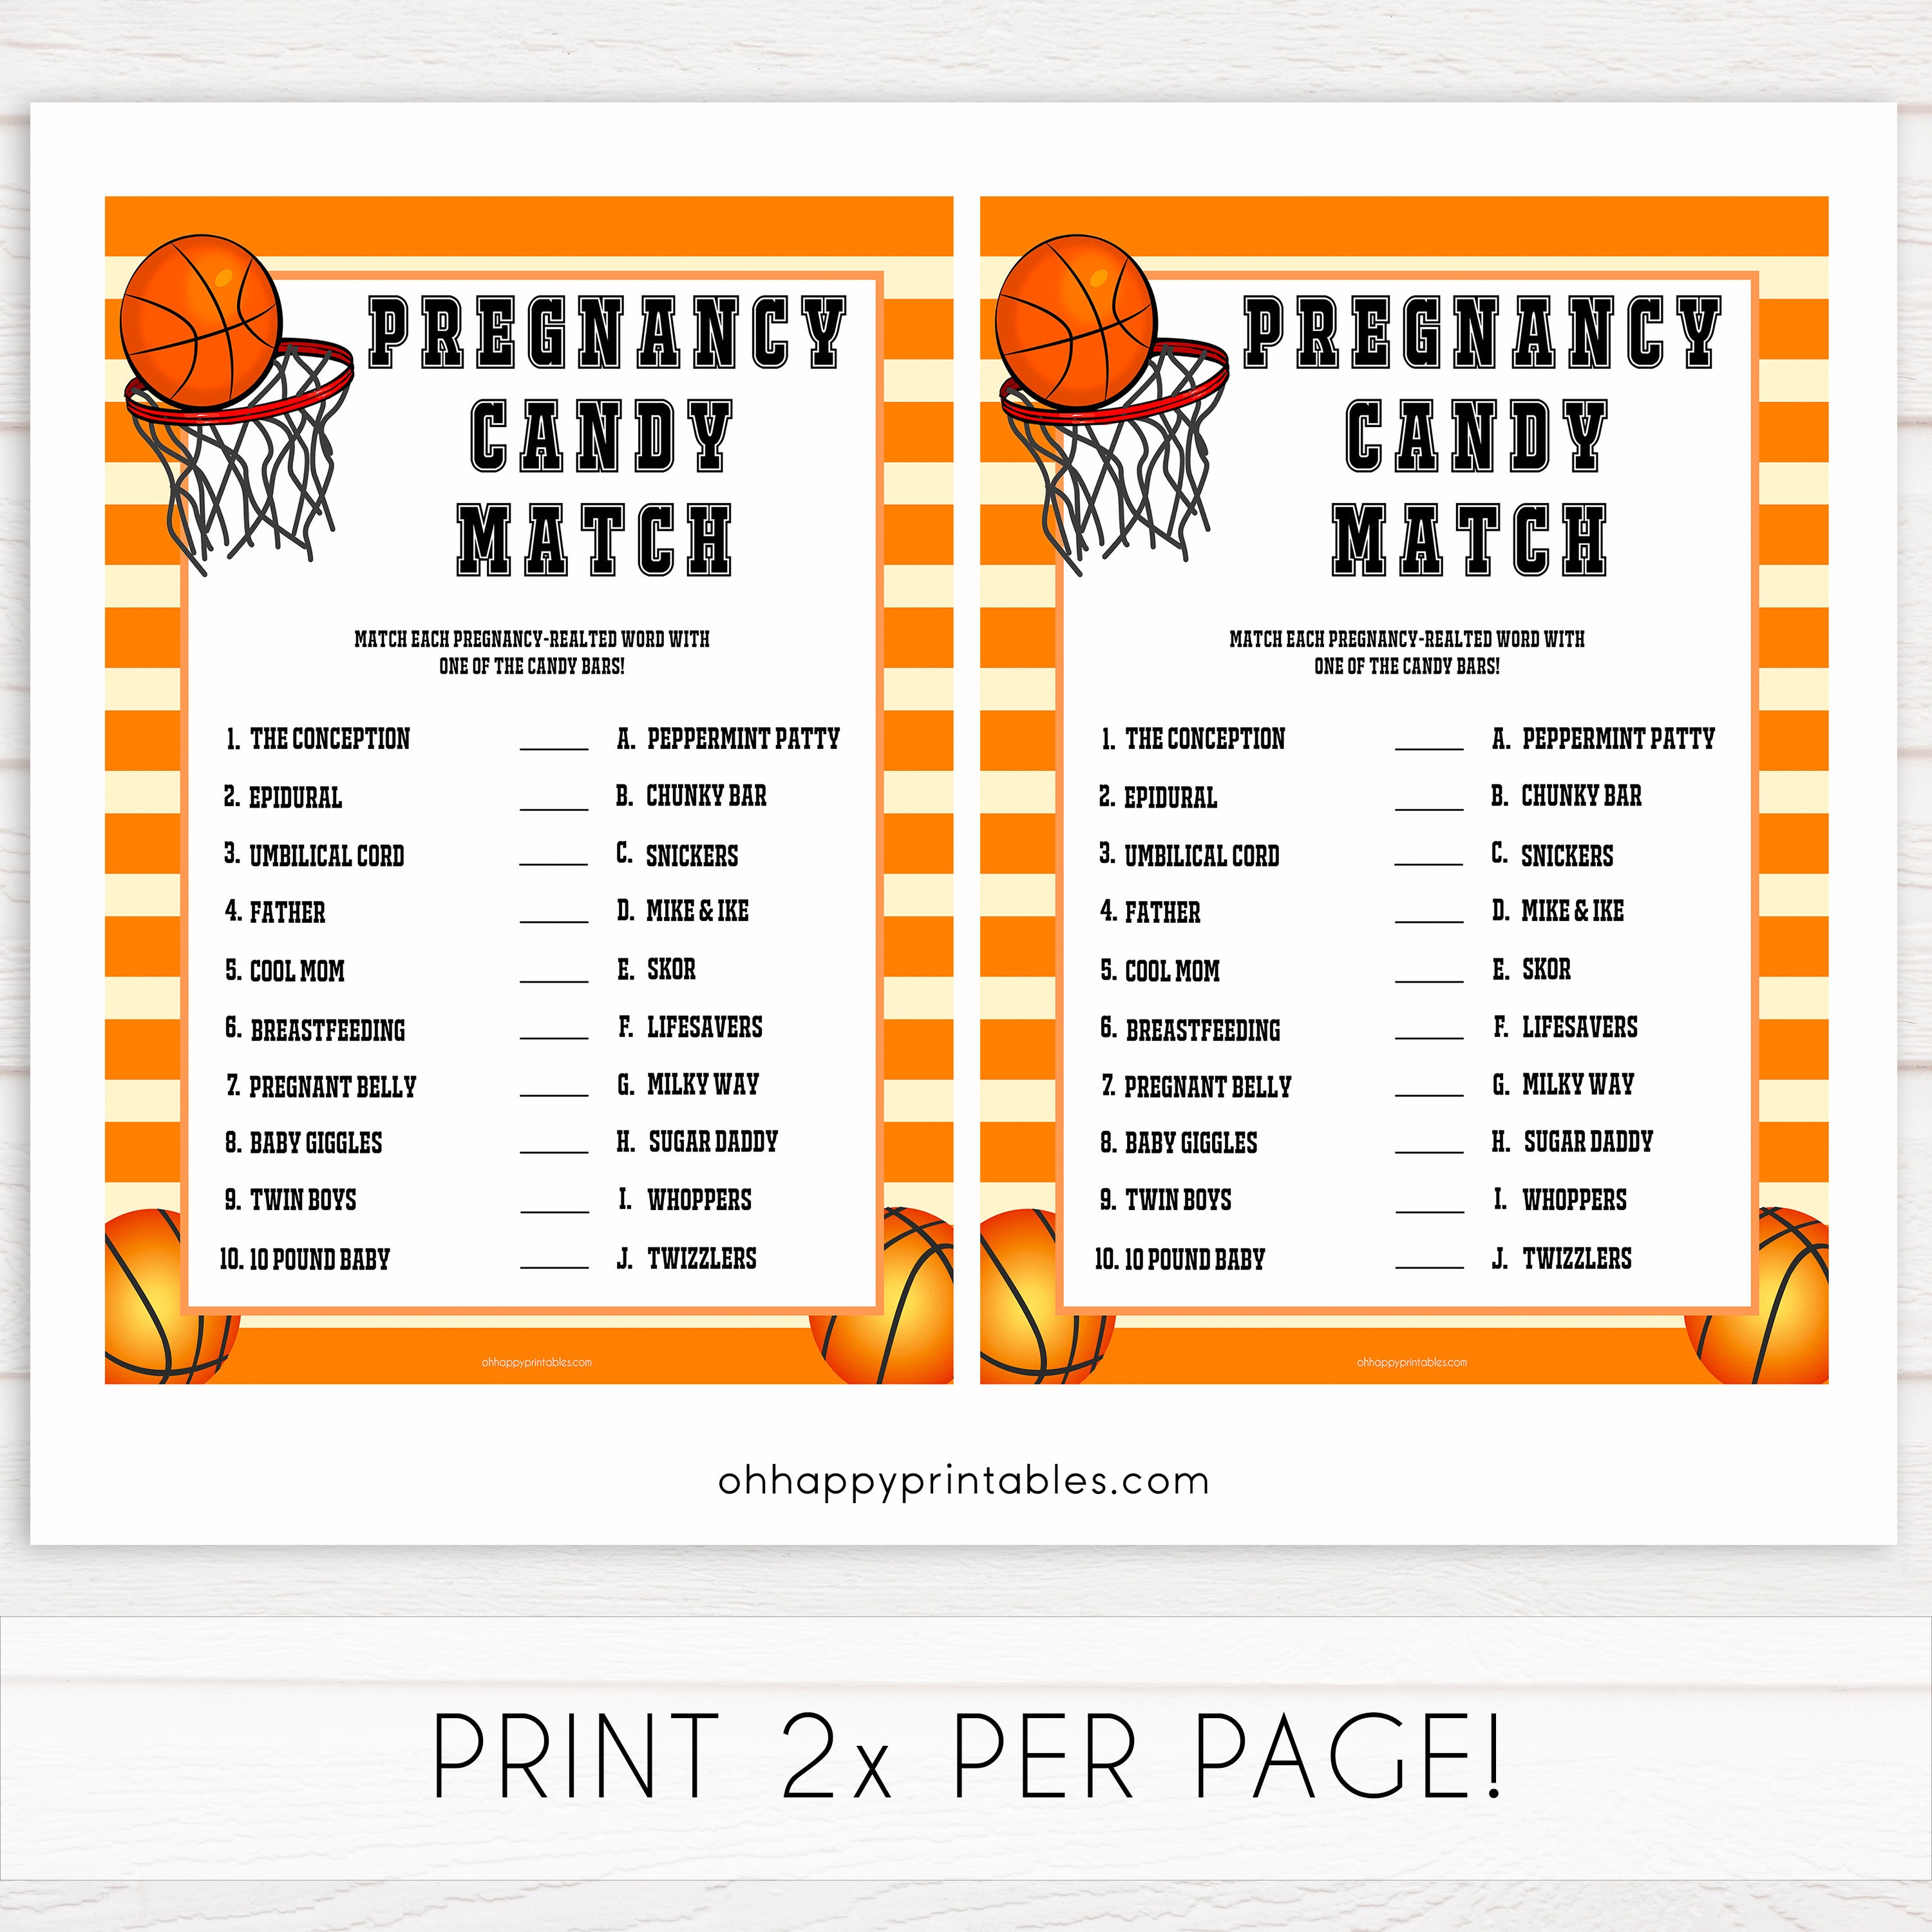 Basketball baby shower games, pregnancy candy match baby game, printable baby games, basket baby games, baby shower games, basketball baby shower idea, fun baby games, popular baby games